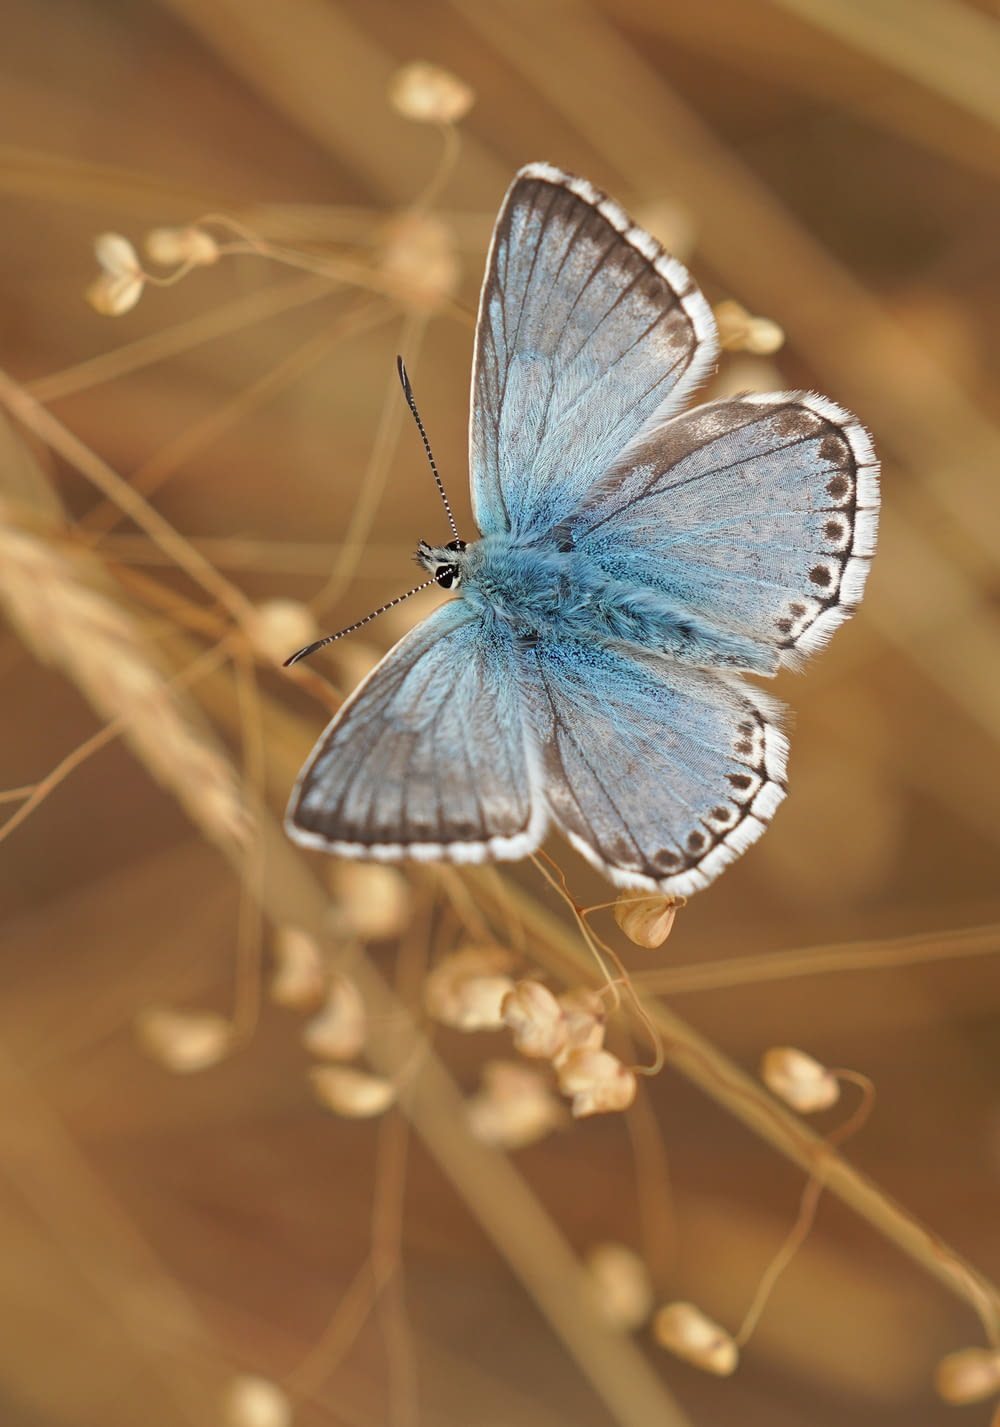 blue and white butterfly perched on brown plant